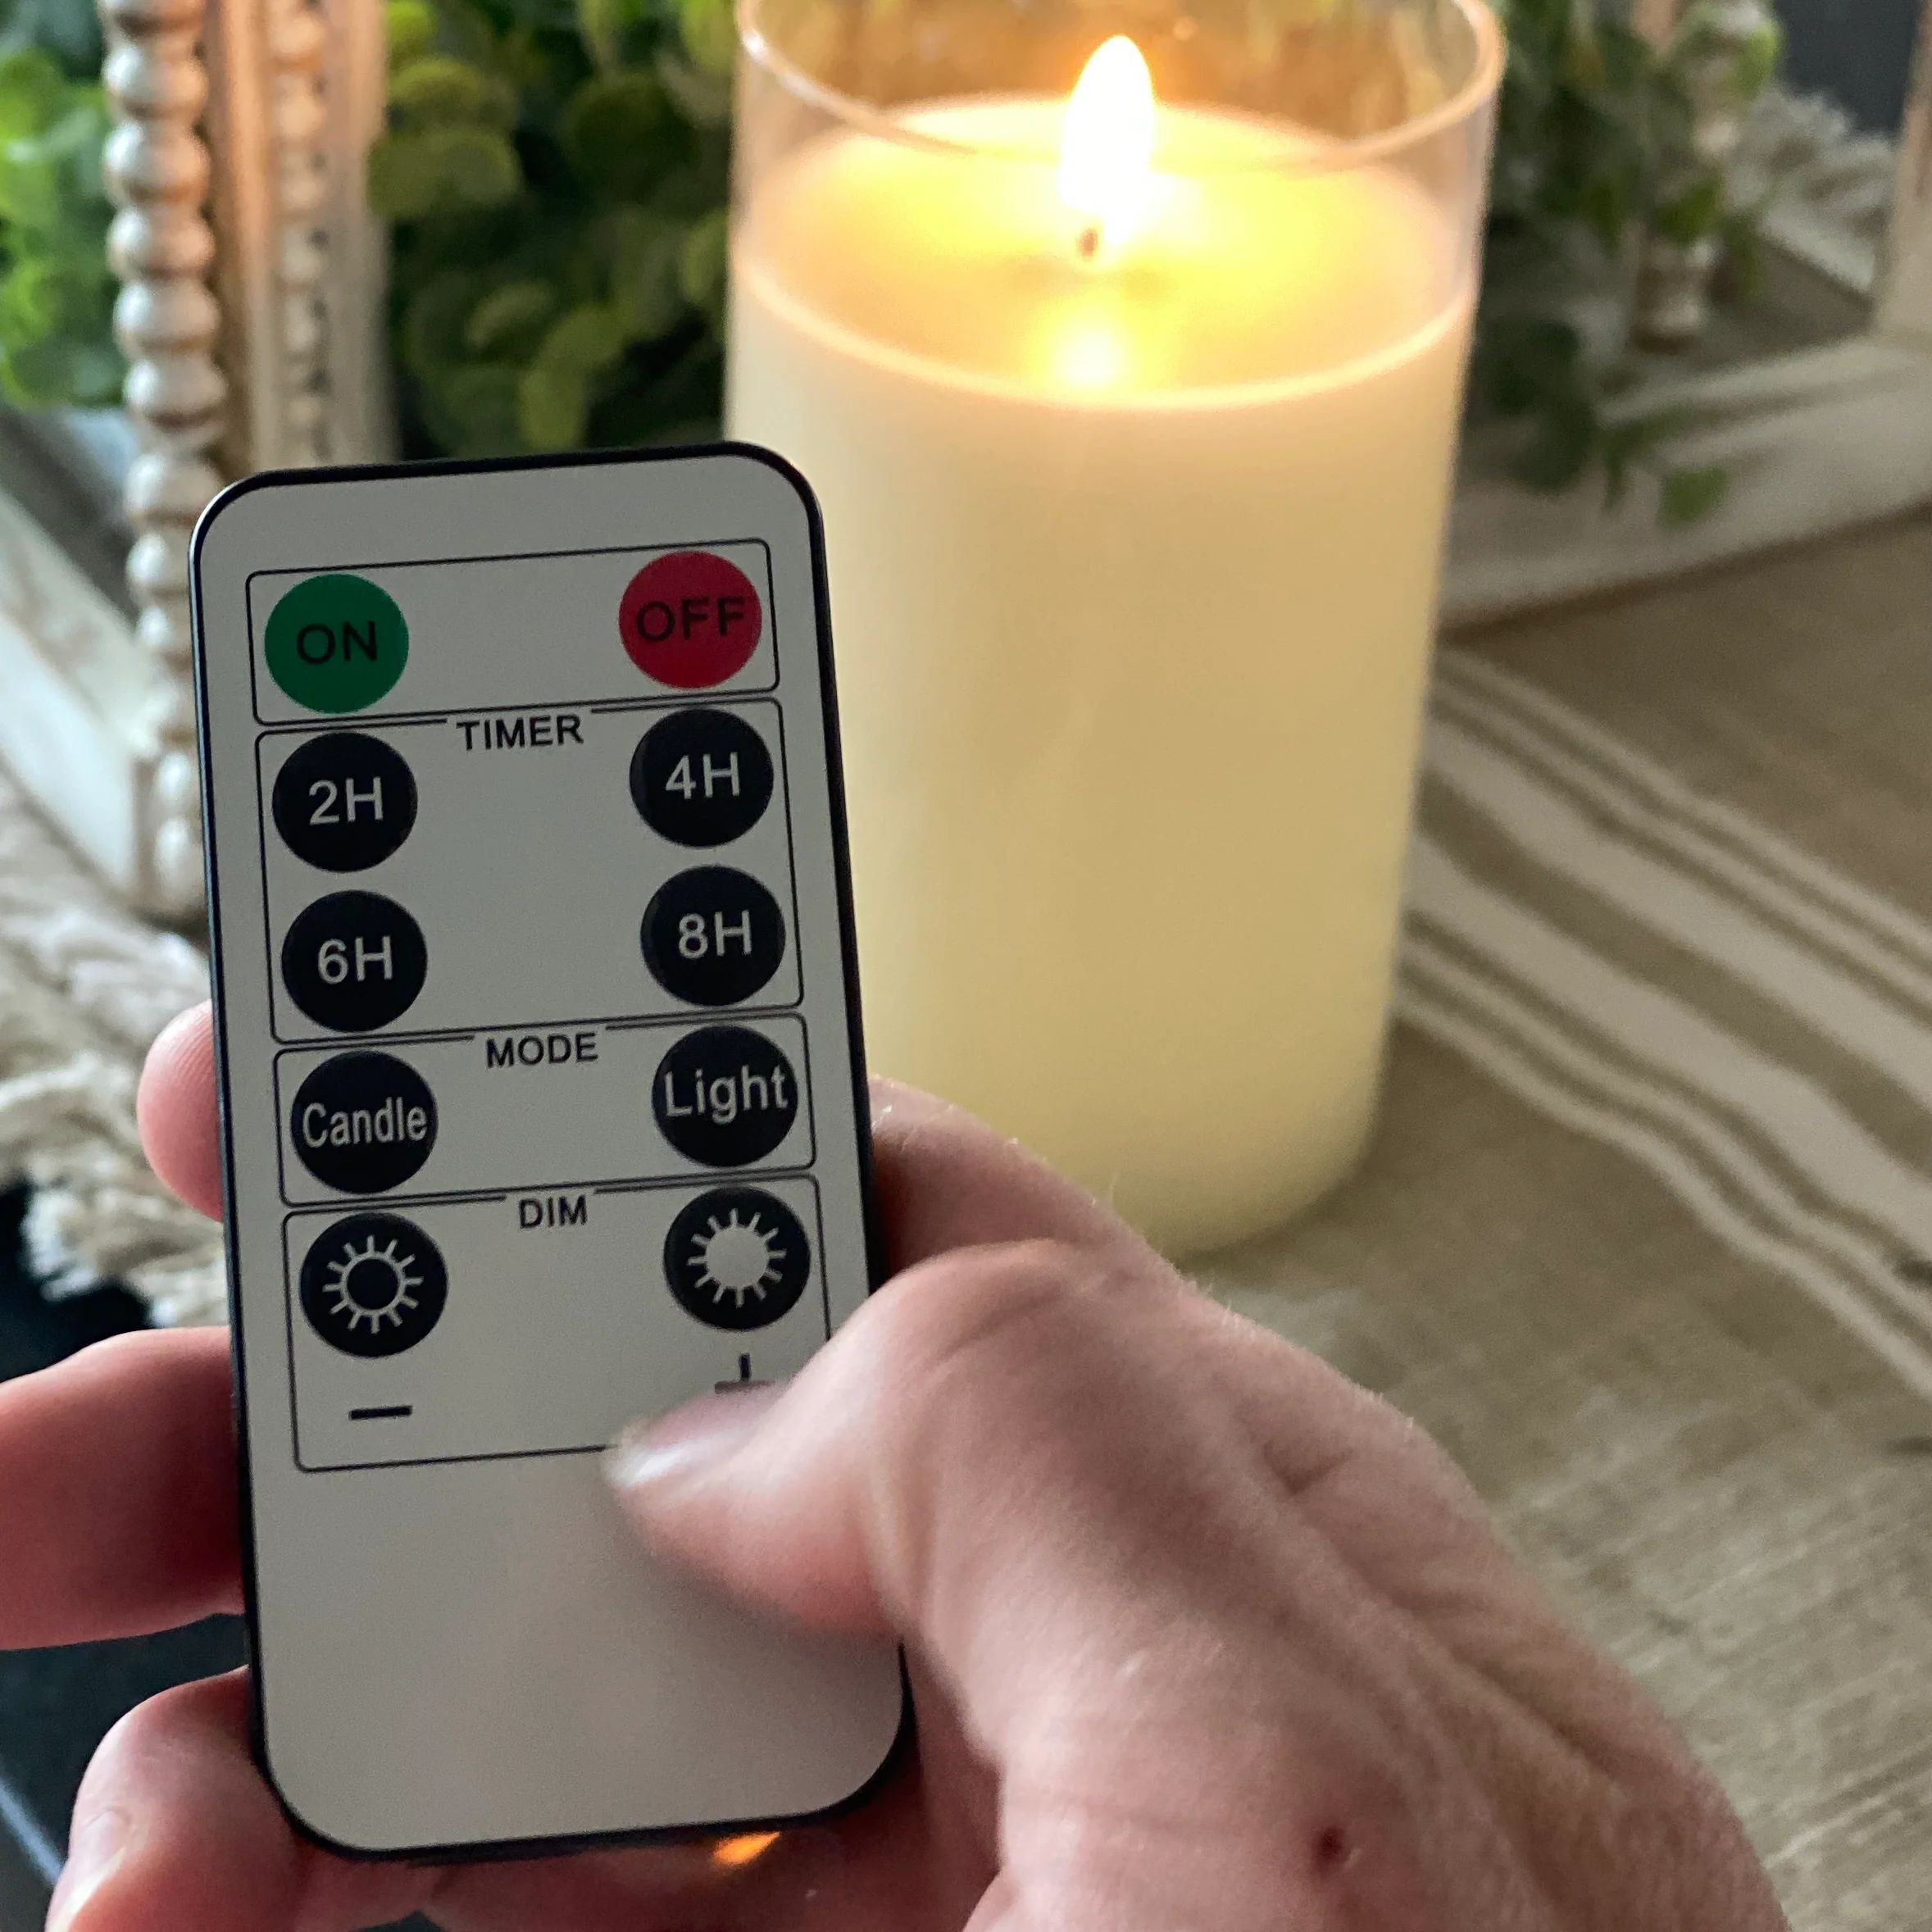 10 BUTTON REMOTE CONTROL for flameless candles | Interior Delights